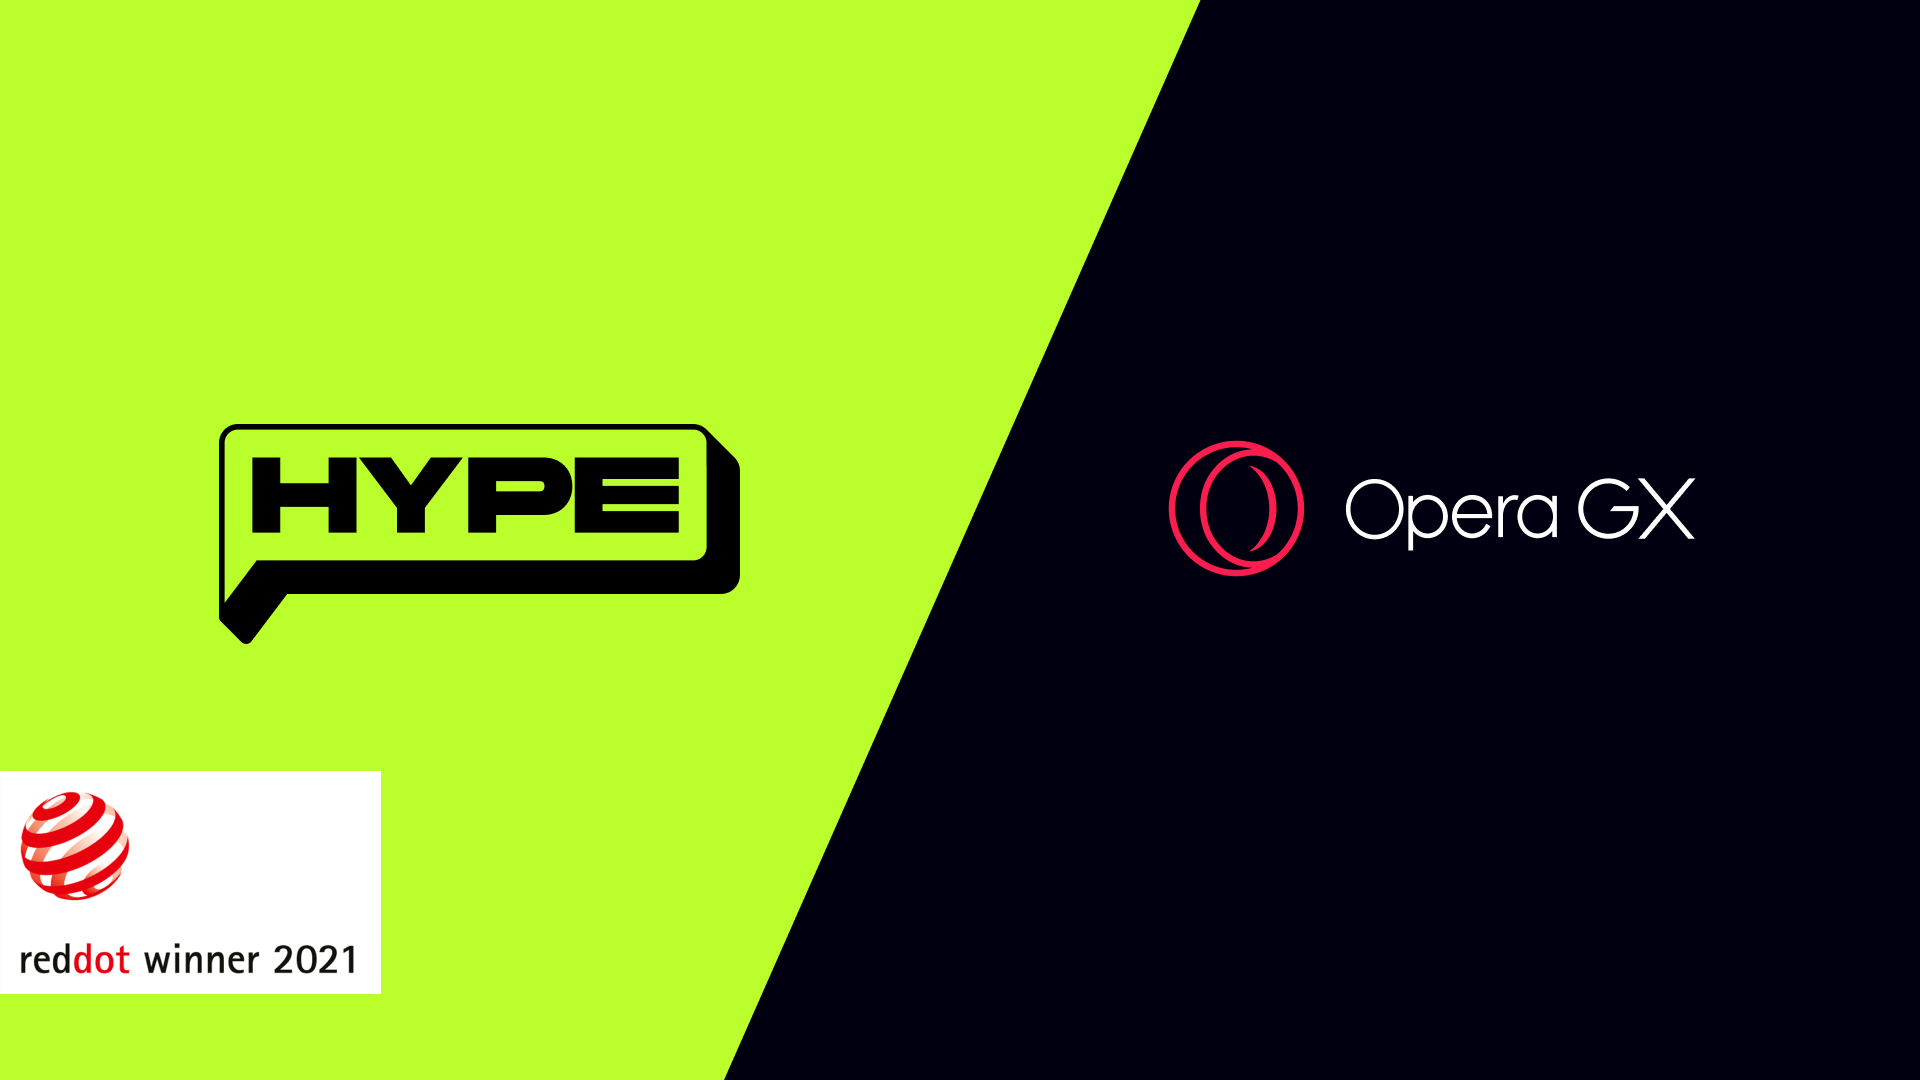 Hype and Opera GX are red dot winners